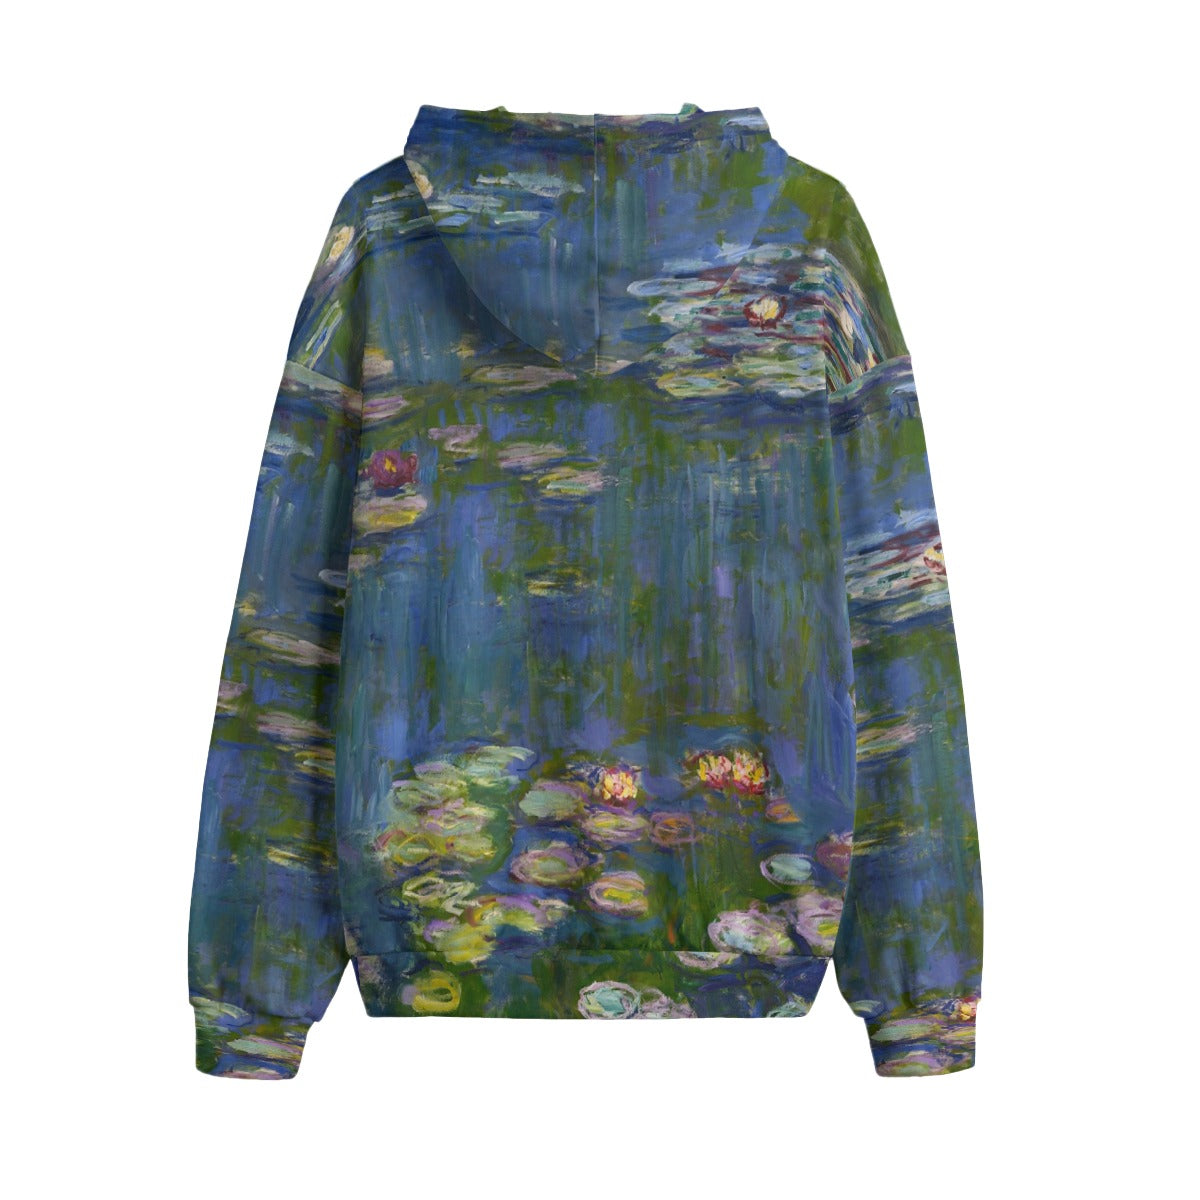 Artistic Wearable Clothing inspired by Monet